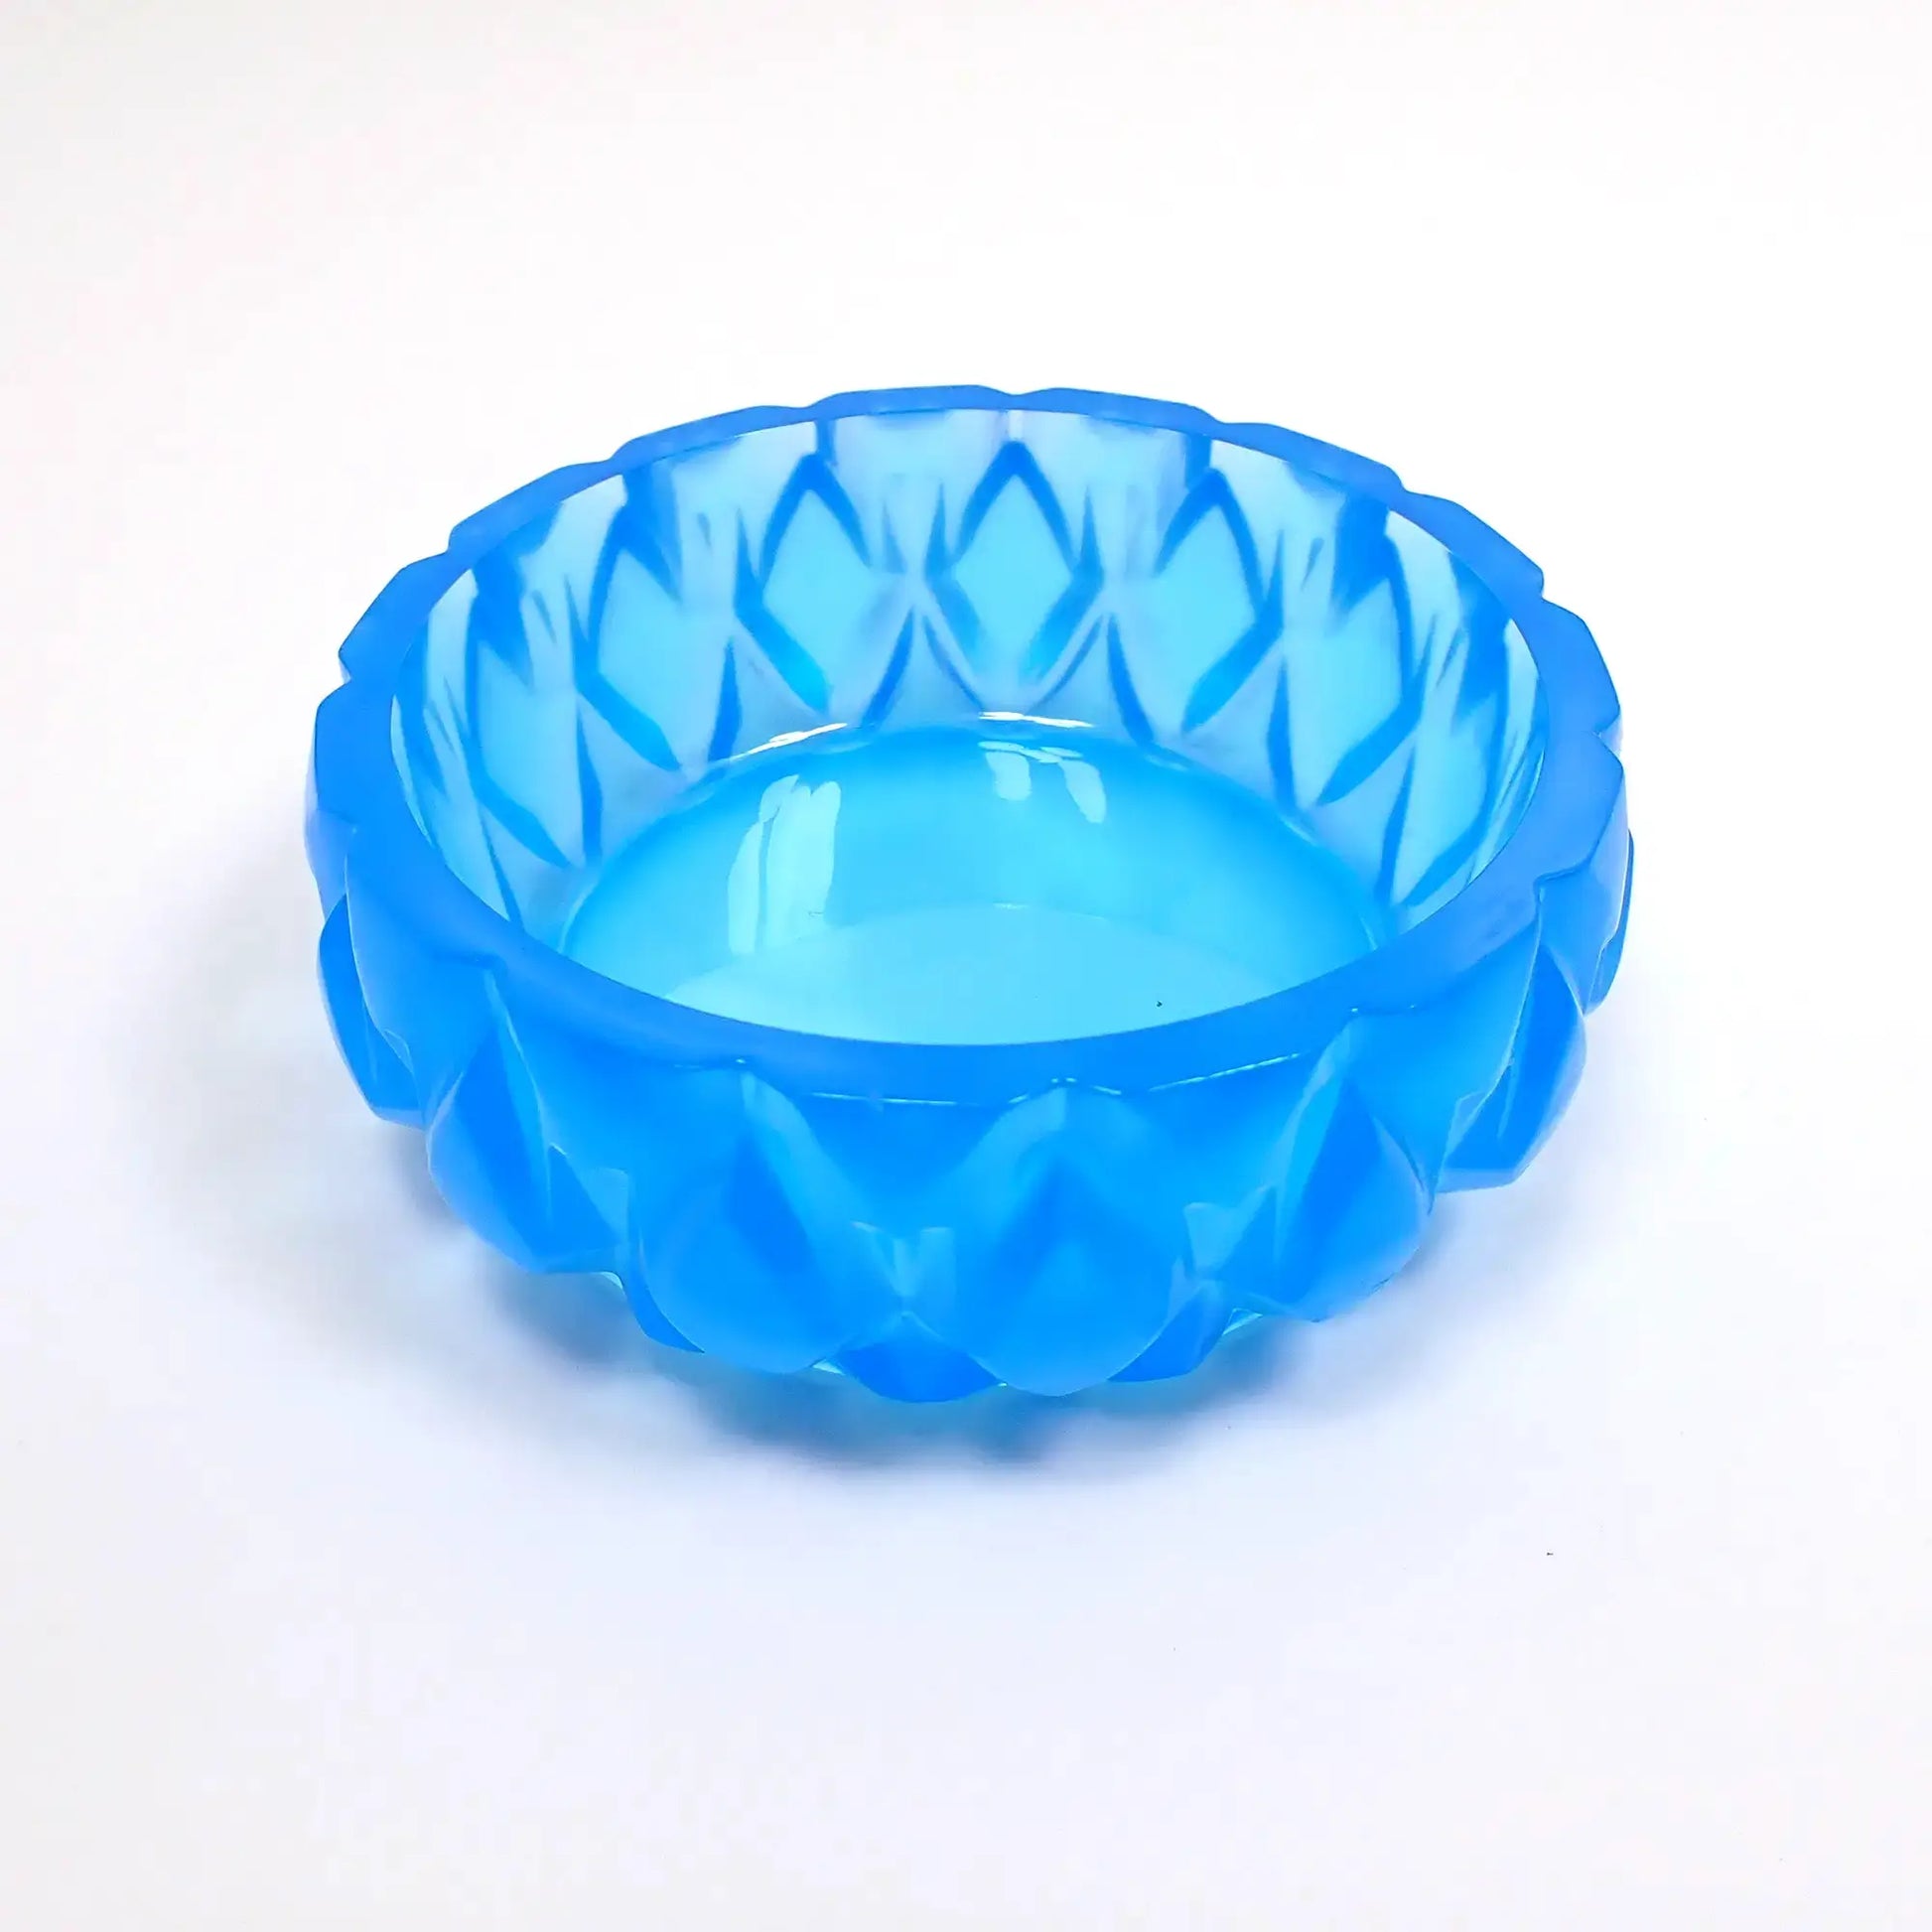 Side view of the small handmade short round succulent pot. It has a short round shape with bright neon blue resin. There is a diamond shaped pattern going all the way around. The large opening on top is wide for putting small plants or using as a trinket dish.